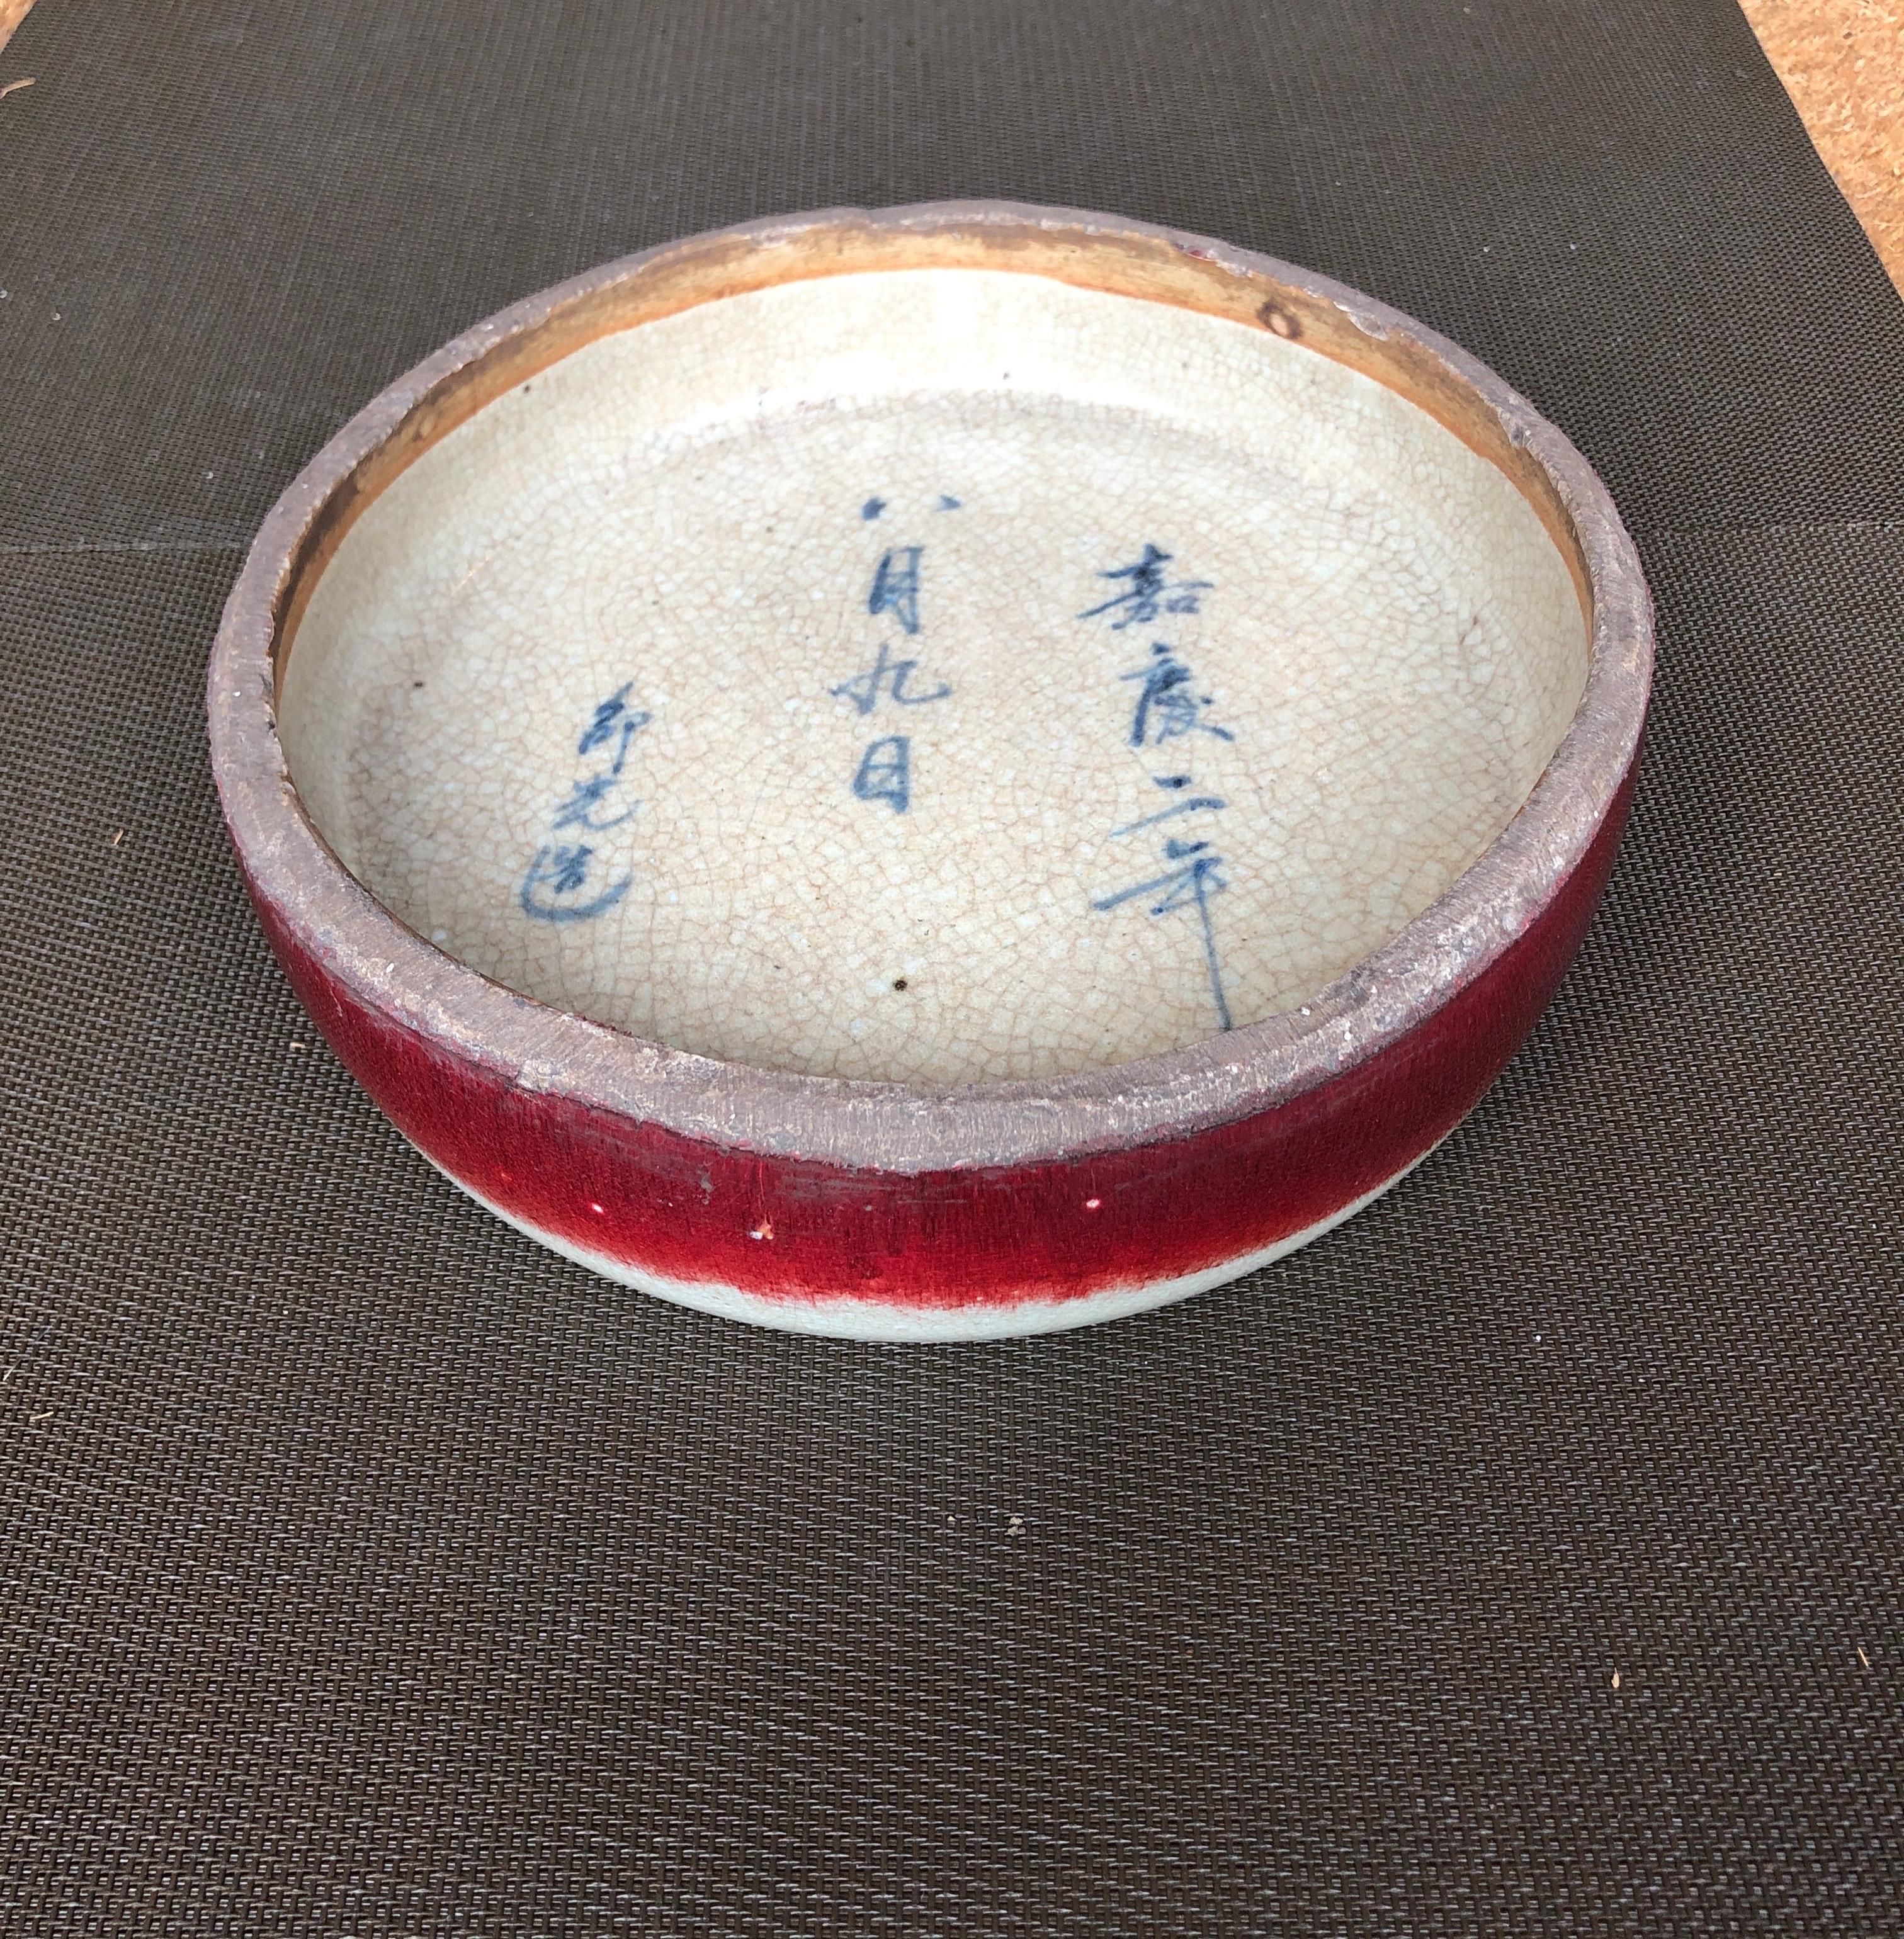 Antique Ceramic Brush Washer with Chinese Calligraphy and Striking Red Accent 5